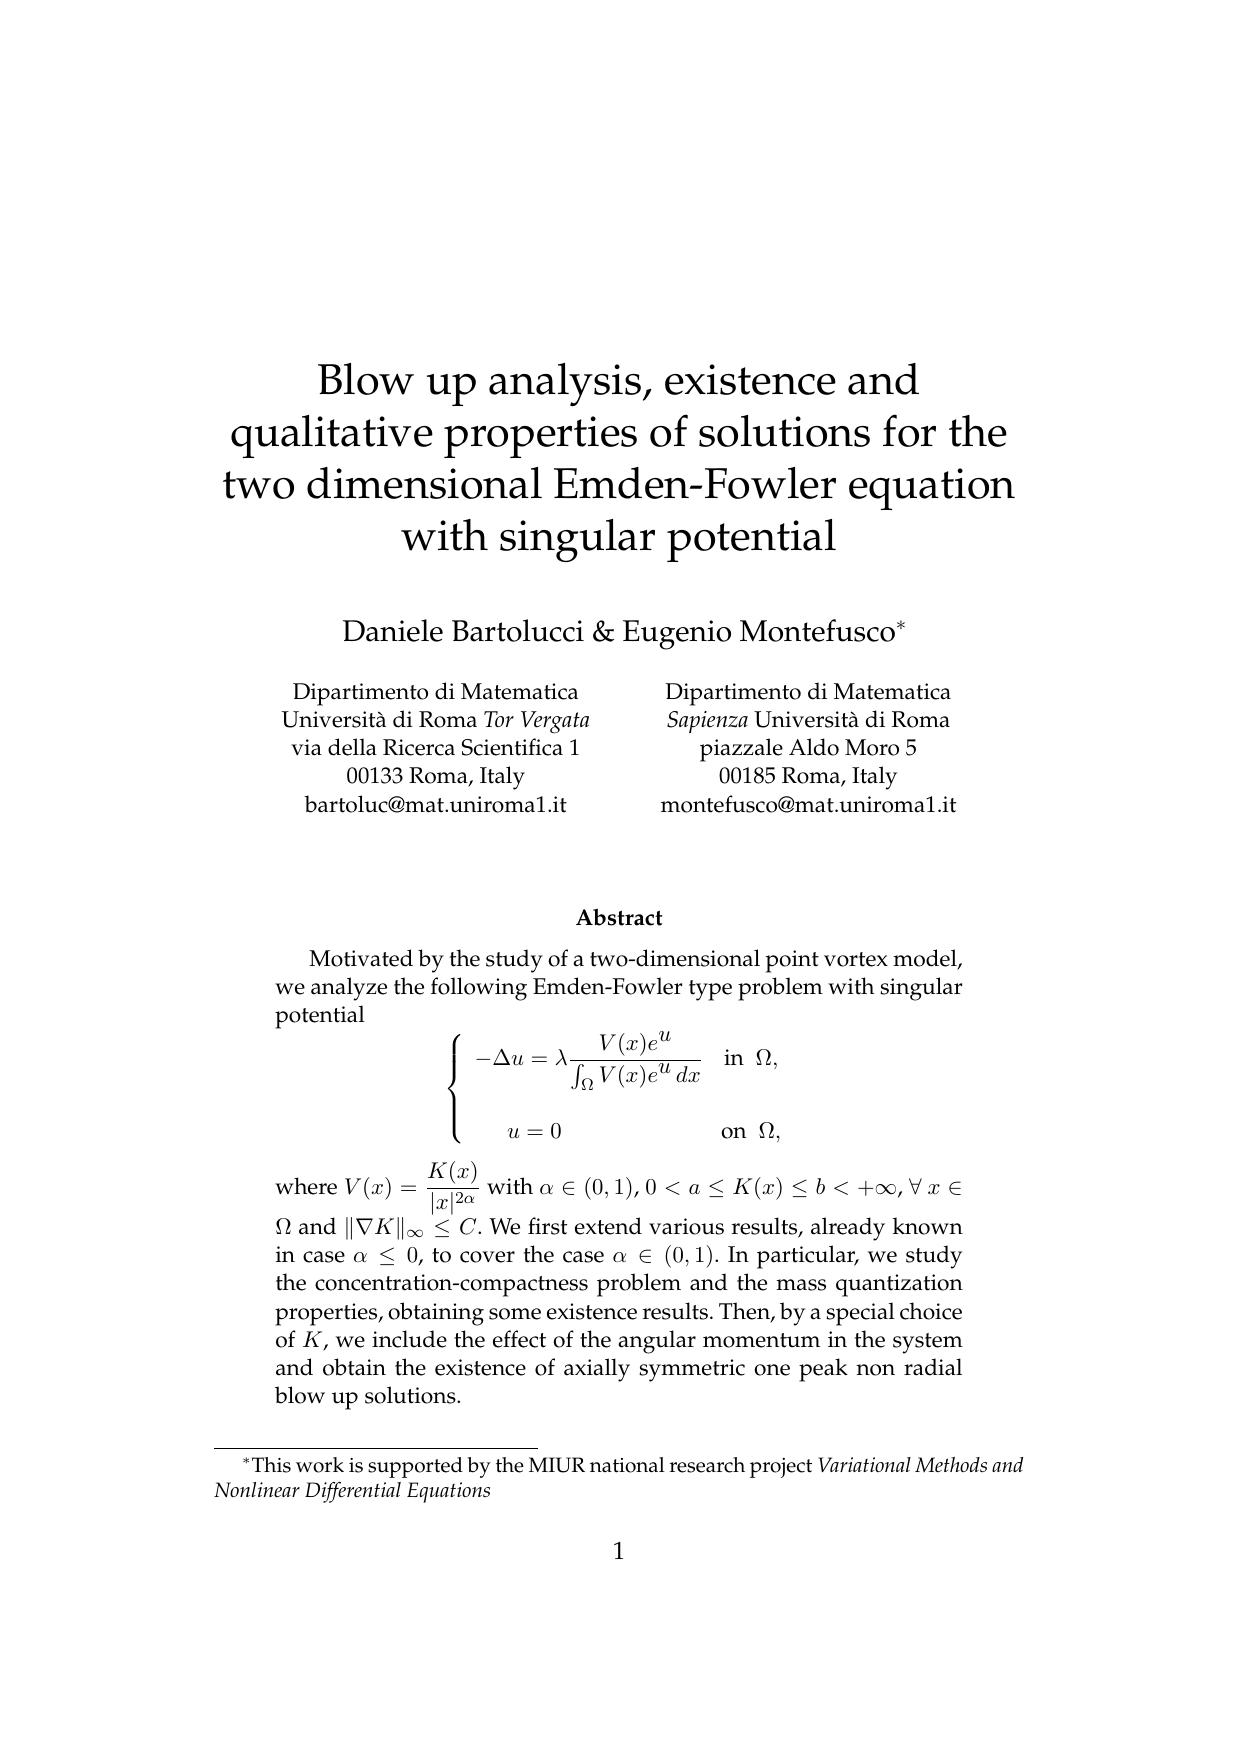 Blow up analysis, existence and qualitative properties of solutions for the two dimensional emden-fowler equation with singular potential - Paper